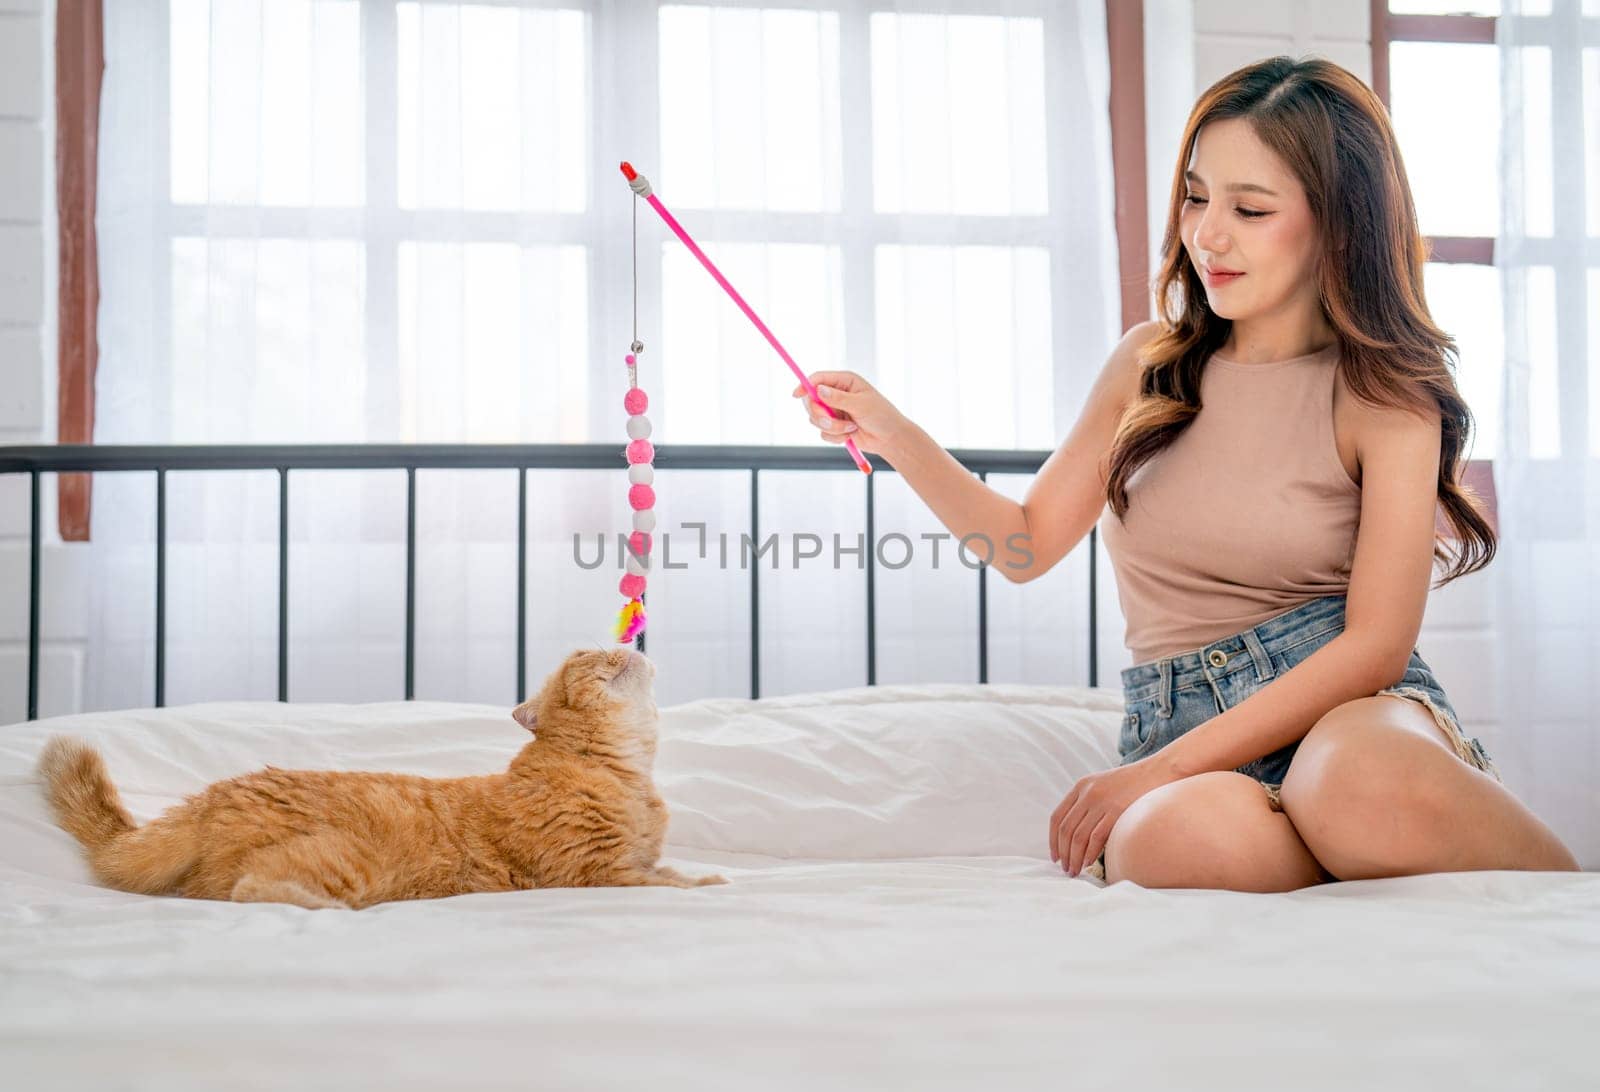 Pretty woman use accessories or toy to play with cat and sit on bed in bedroom, they look happy and fun together.